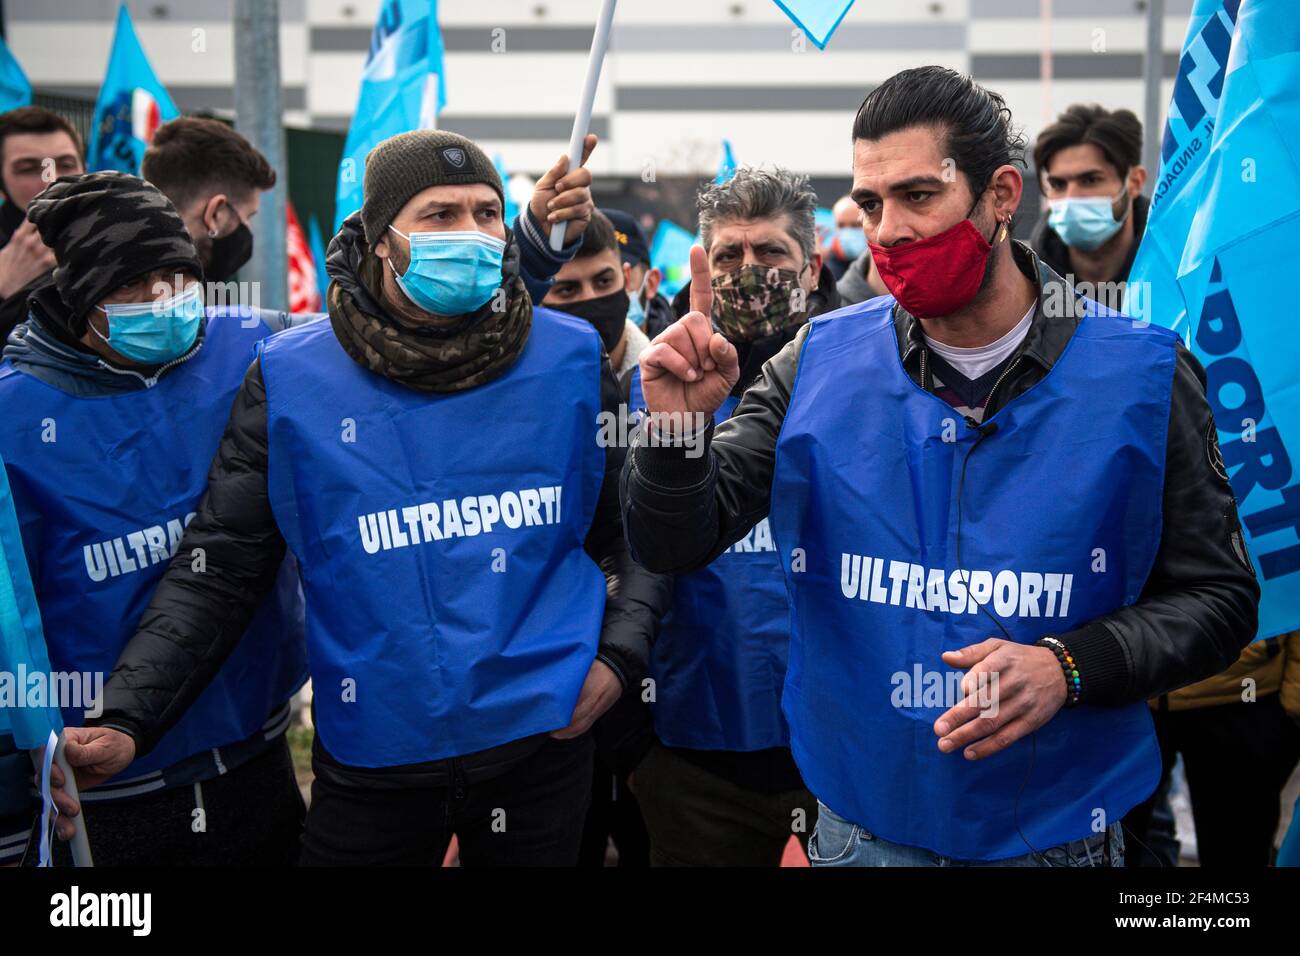 Brandizzo, Italy - 22 March, 2021: Amazon's employees of 'Uiltrasporti' trade union are seen during a demonstration for better working conditions in front of the Amazon distribution centre in Brandizzo. Trade unions said that 9,500 warehouse workers and 15,000 drivers were on strike in Italy. Credit: Nicolò Campo/Alamy Live News Stock Photo